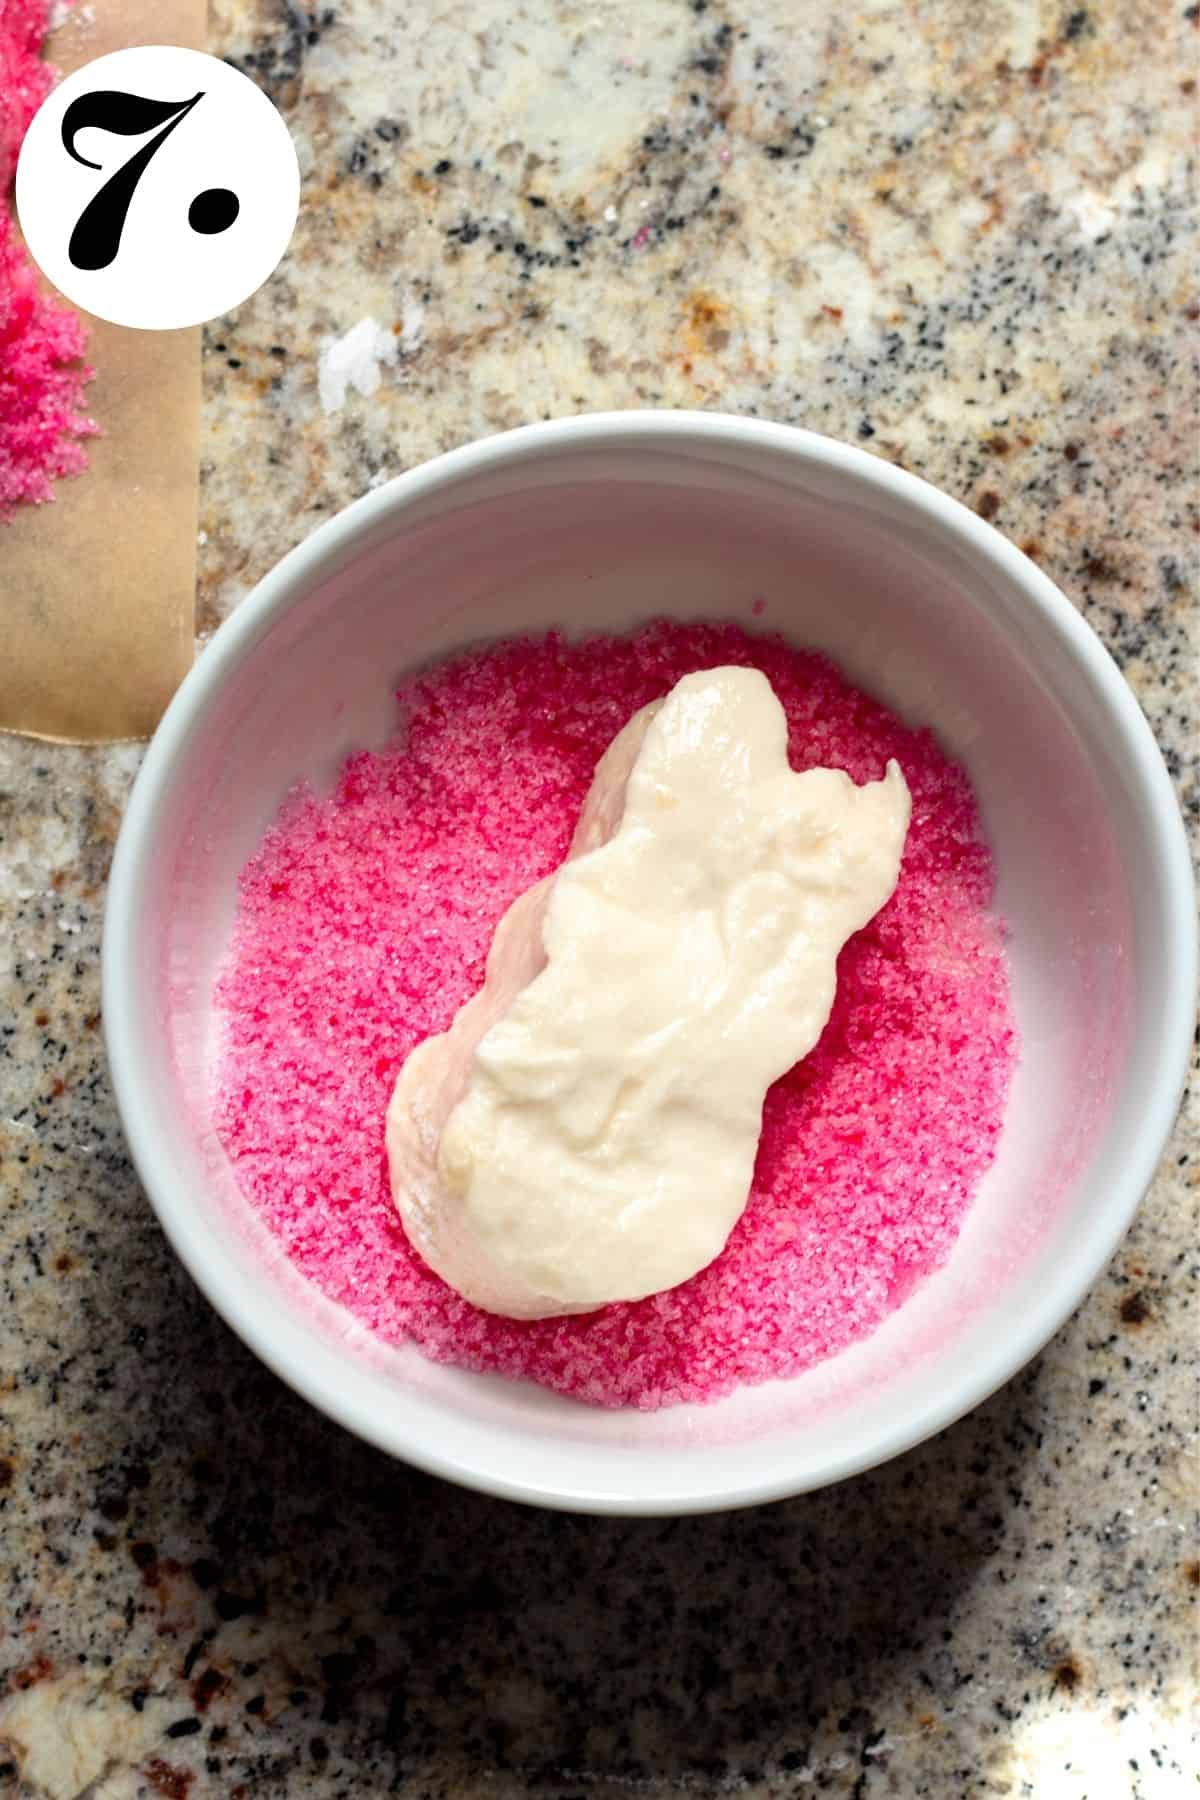 White marshmallow peep on top of pink sugar before being coated.